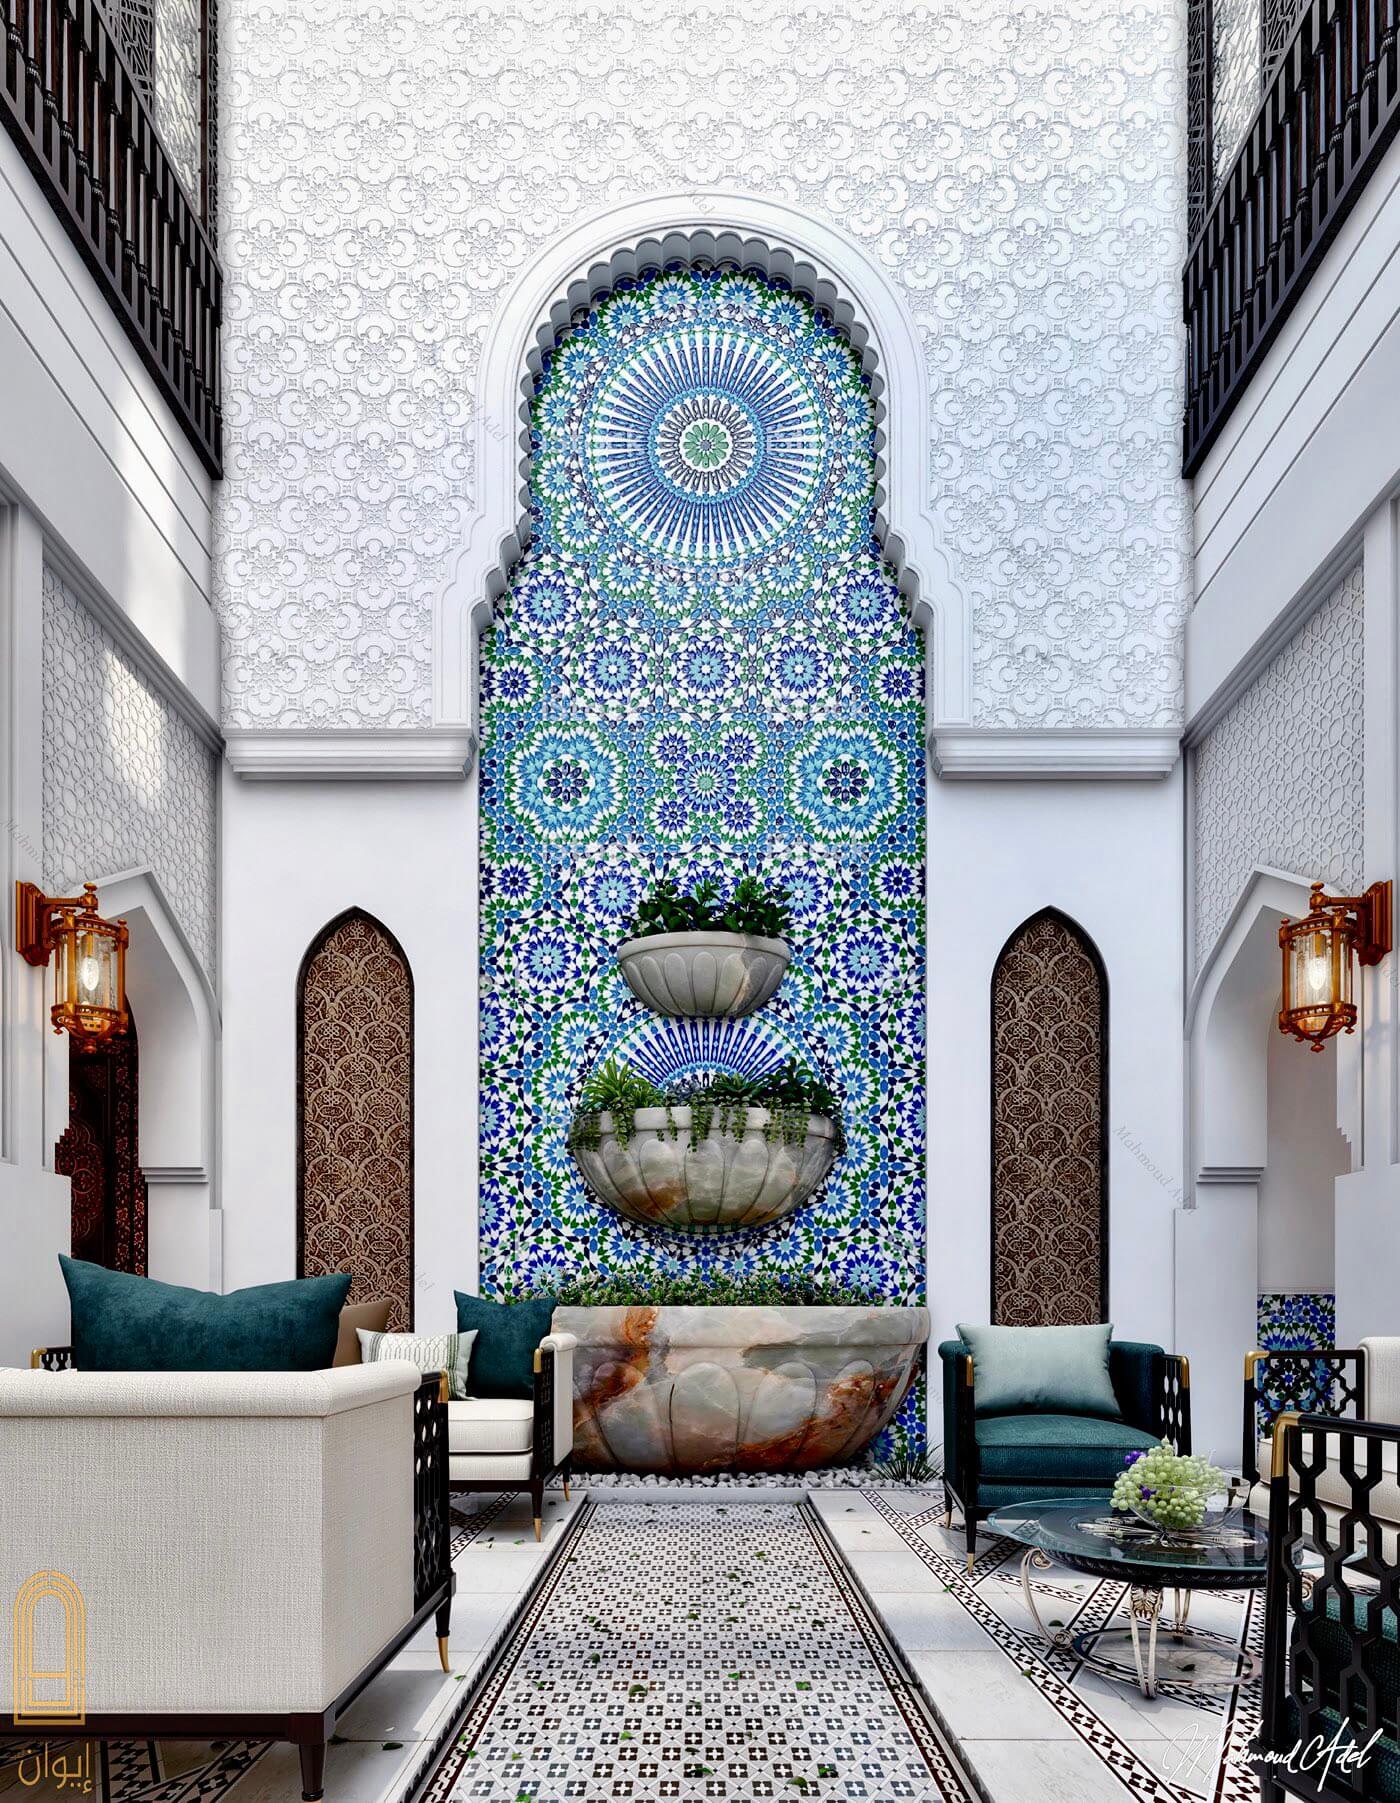 Moroccan Architecture and design : zellige